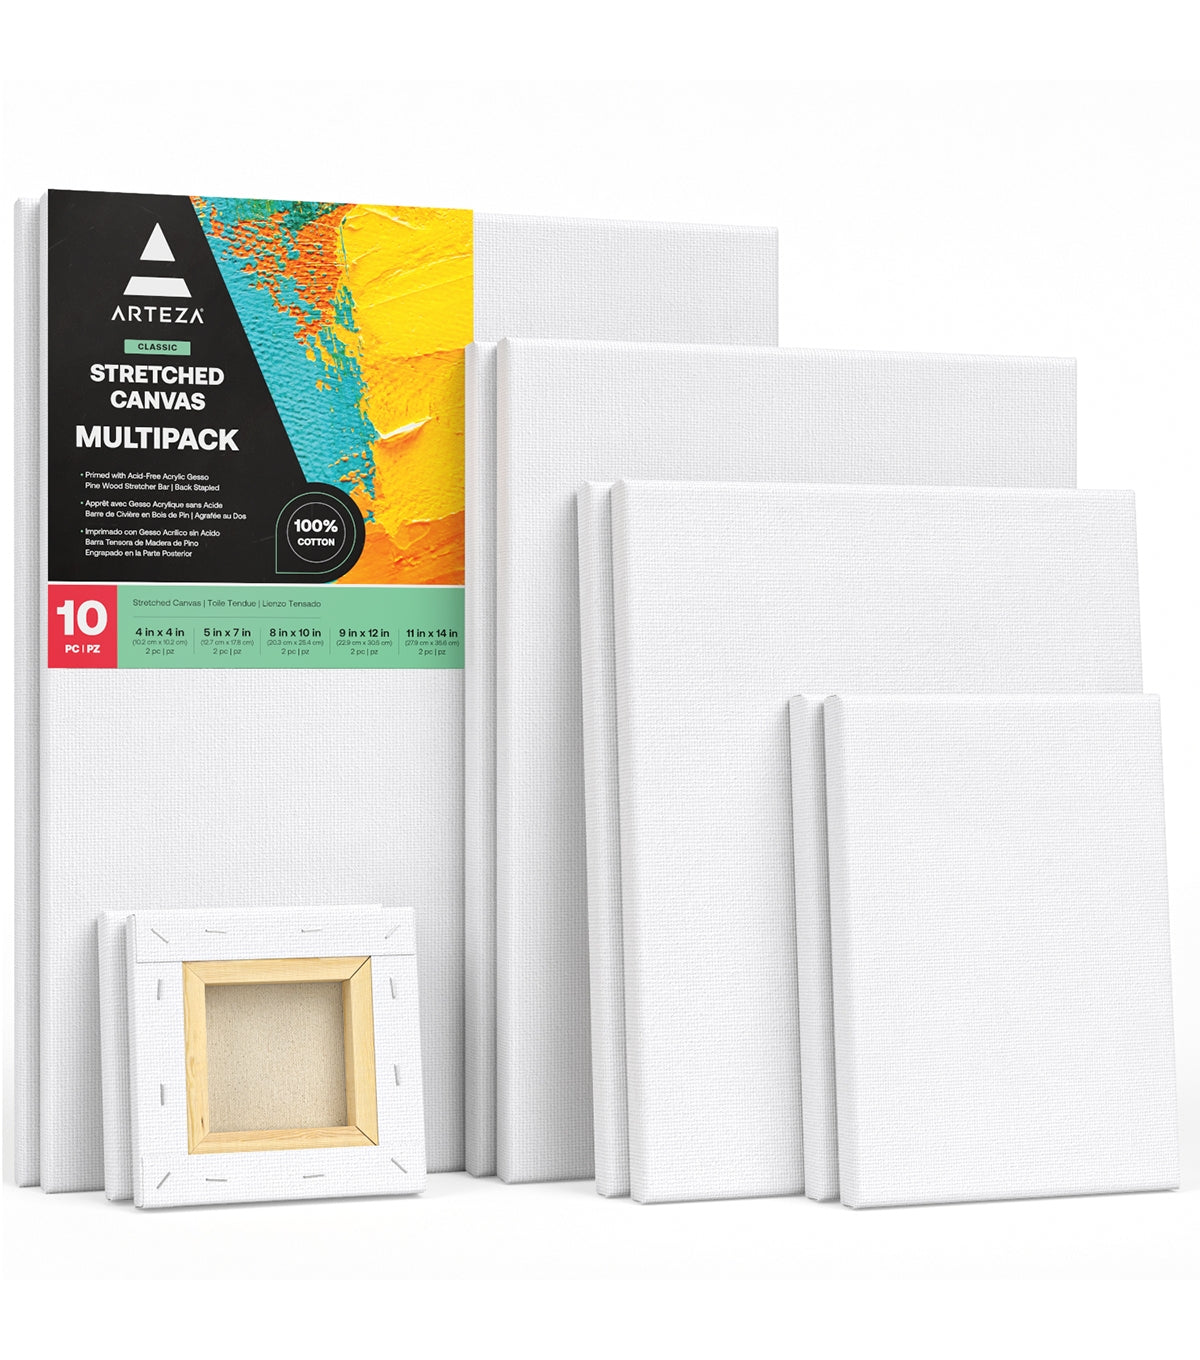 10 Pack Black Stretched Canvas for Painting 9x12 Blank Art Canvases for Paint, Size: 9 x 12